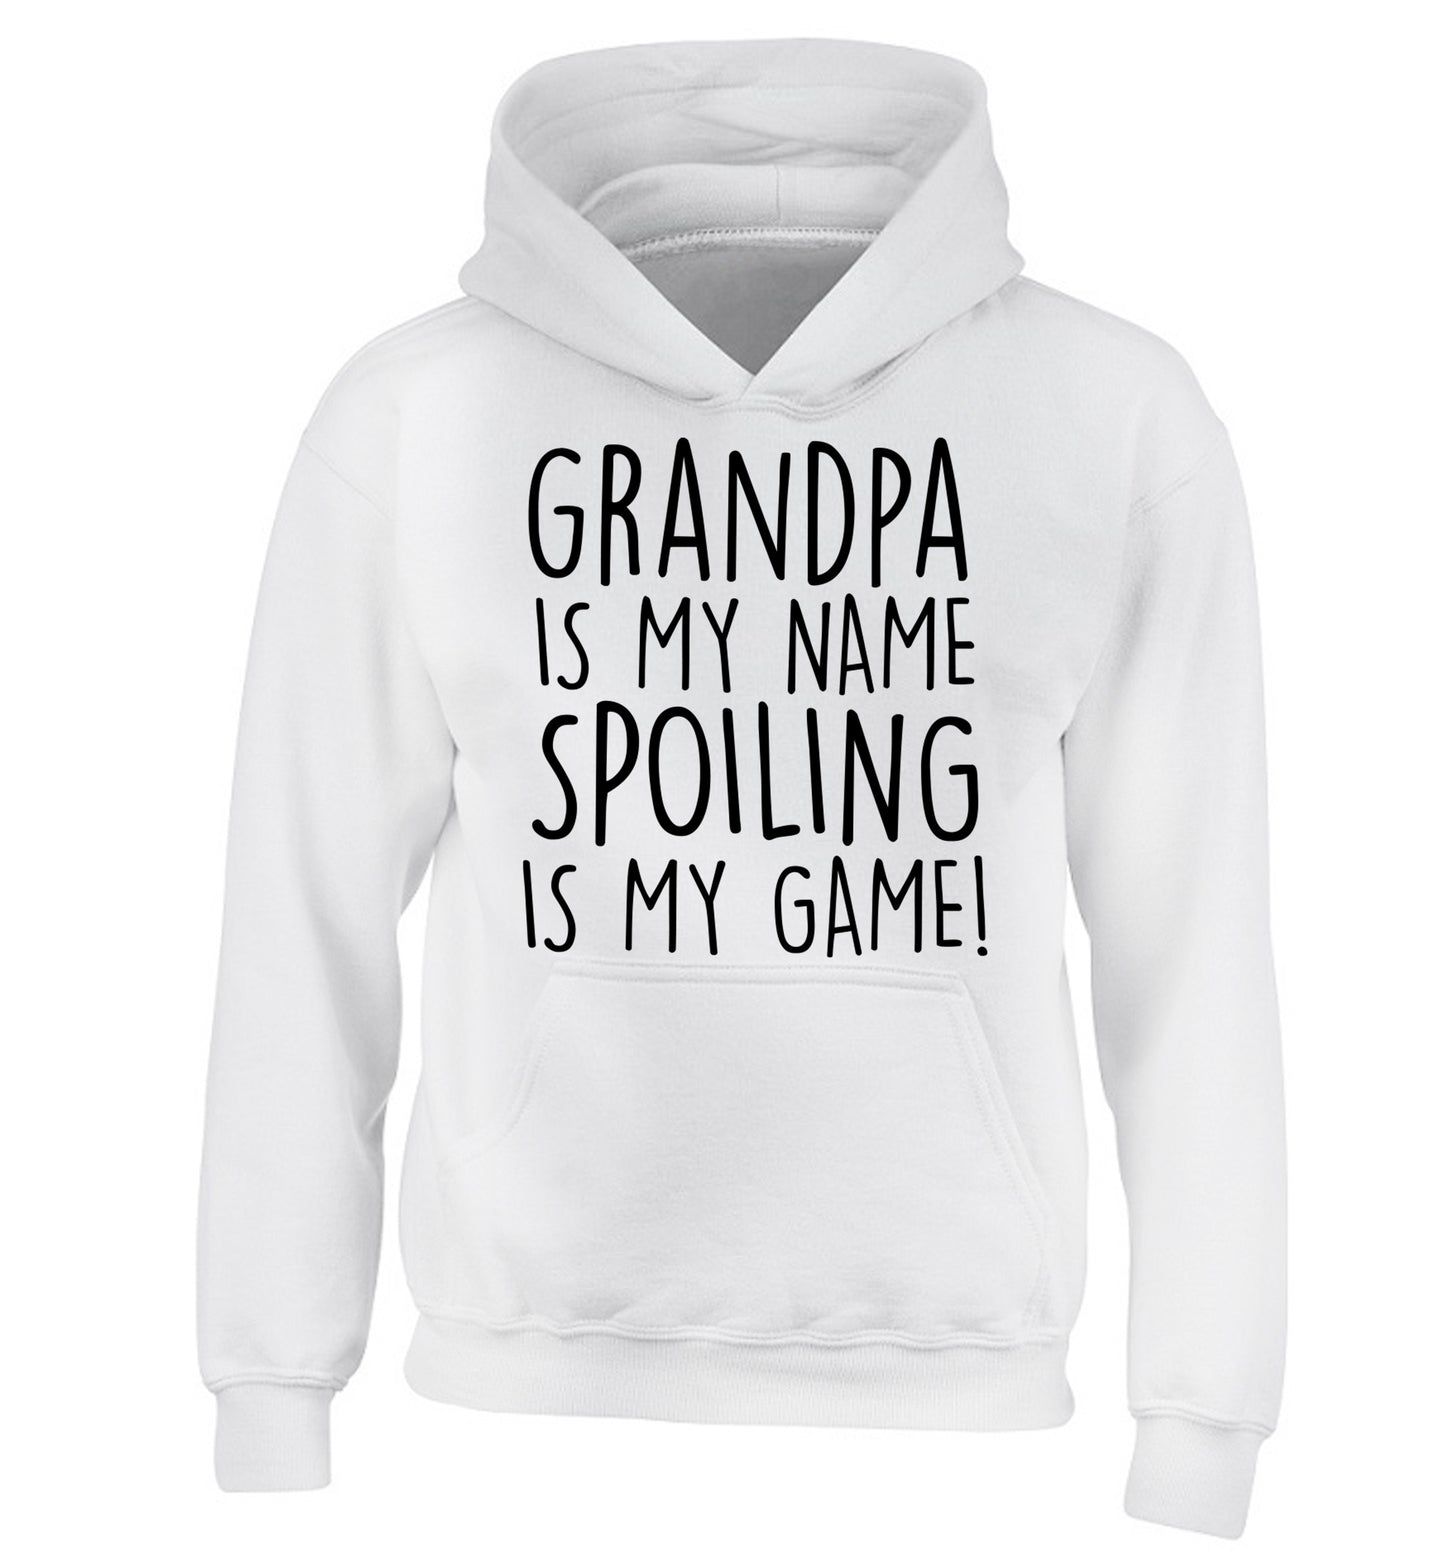 Grandpa is my name, spoiling is my game children's white hoodie 12-14 Years